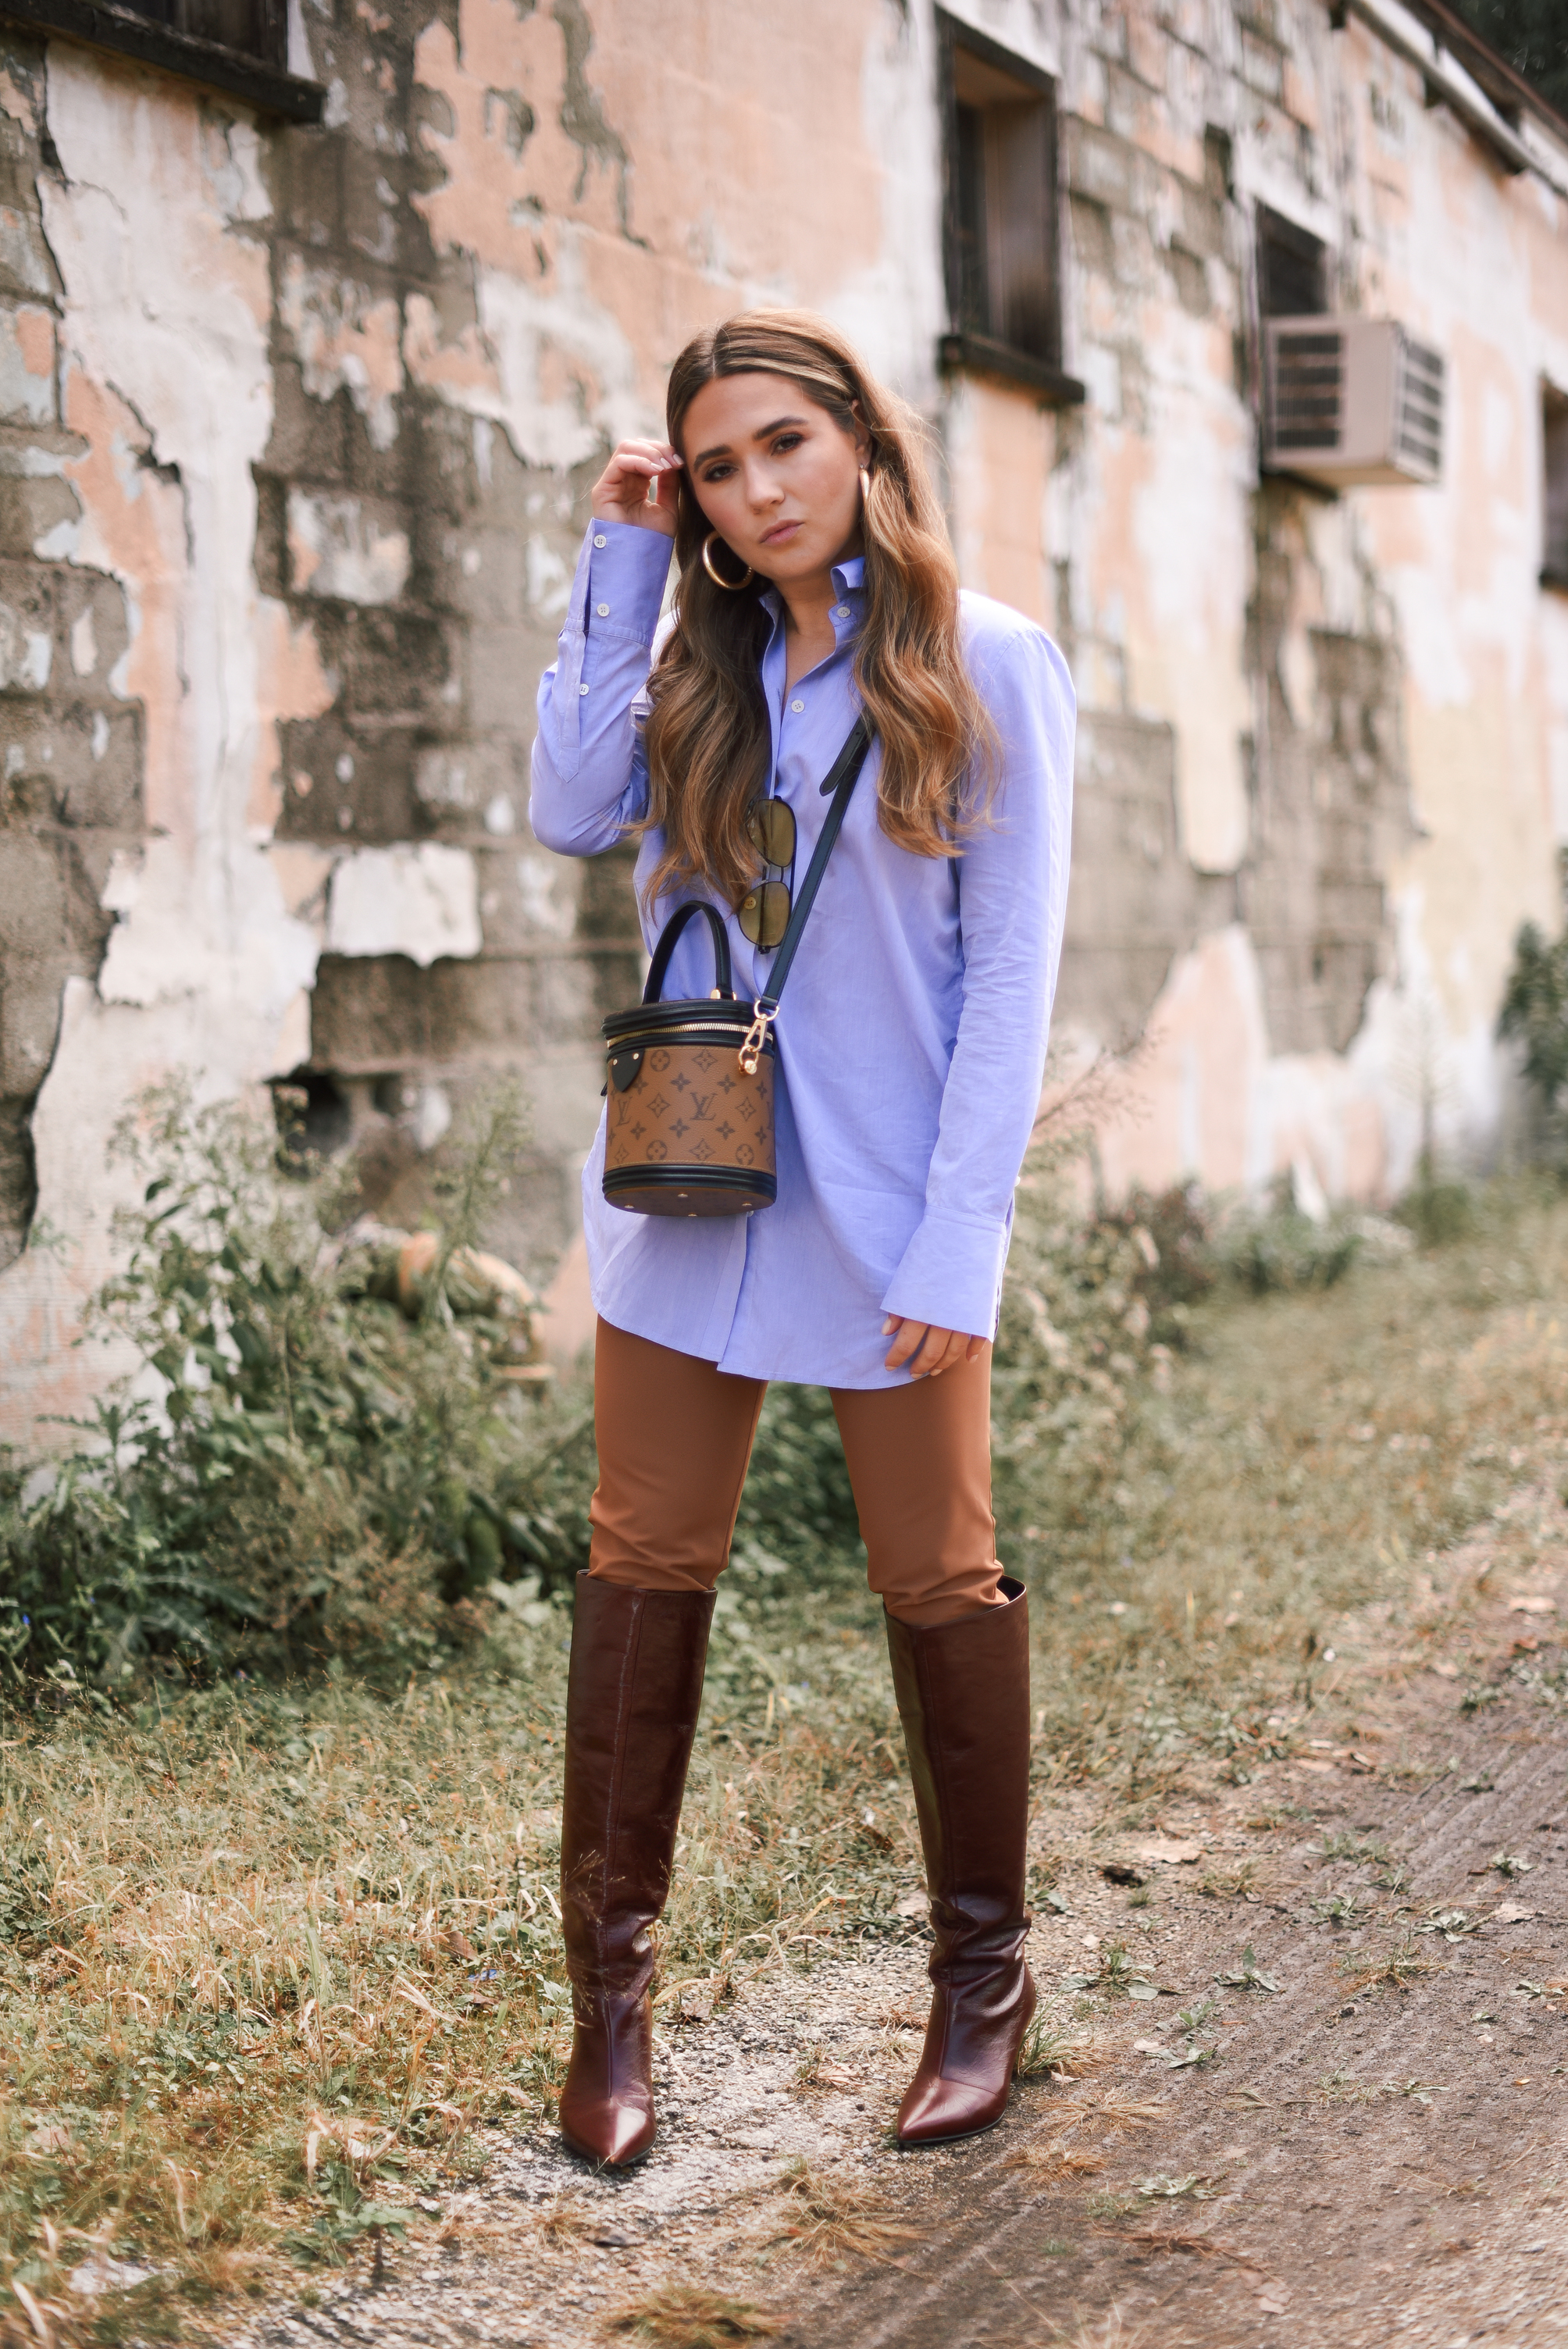 white-leather-jacket-button-up-shirt-blue-knee-high-maroon-boot-bucket-bag-fall-outfit-inspo-street-style-look